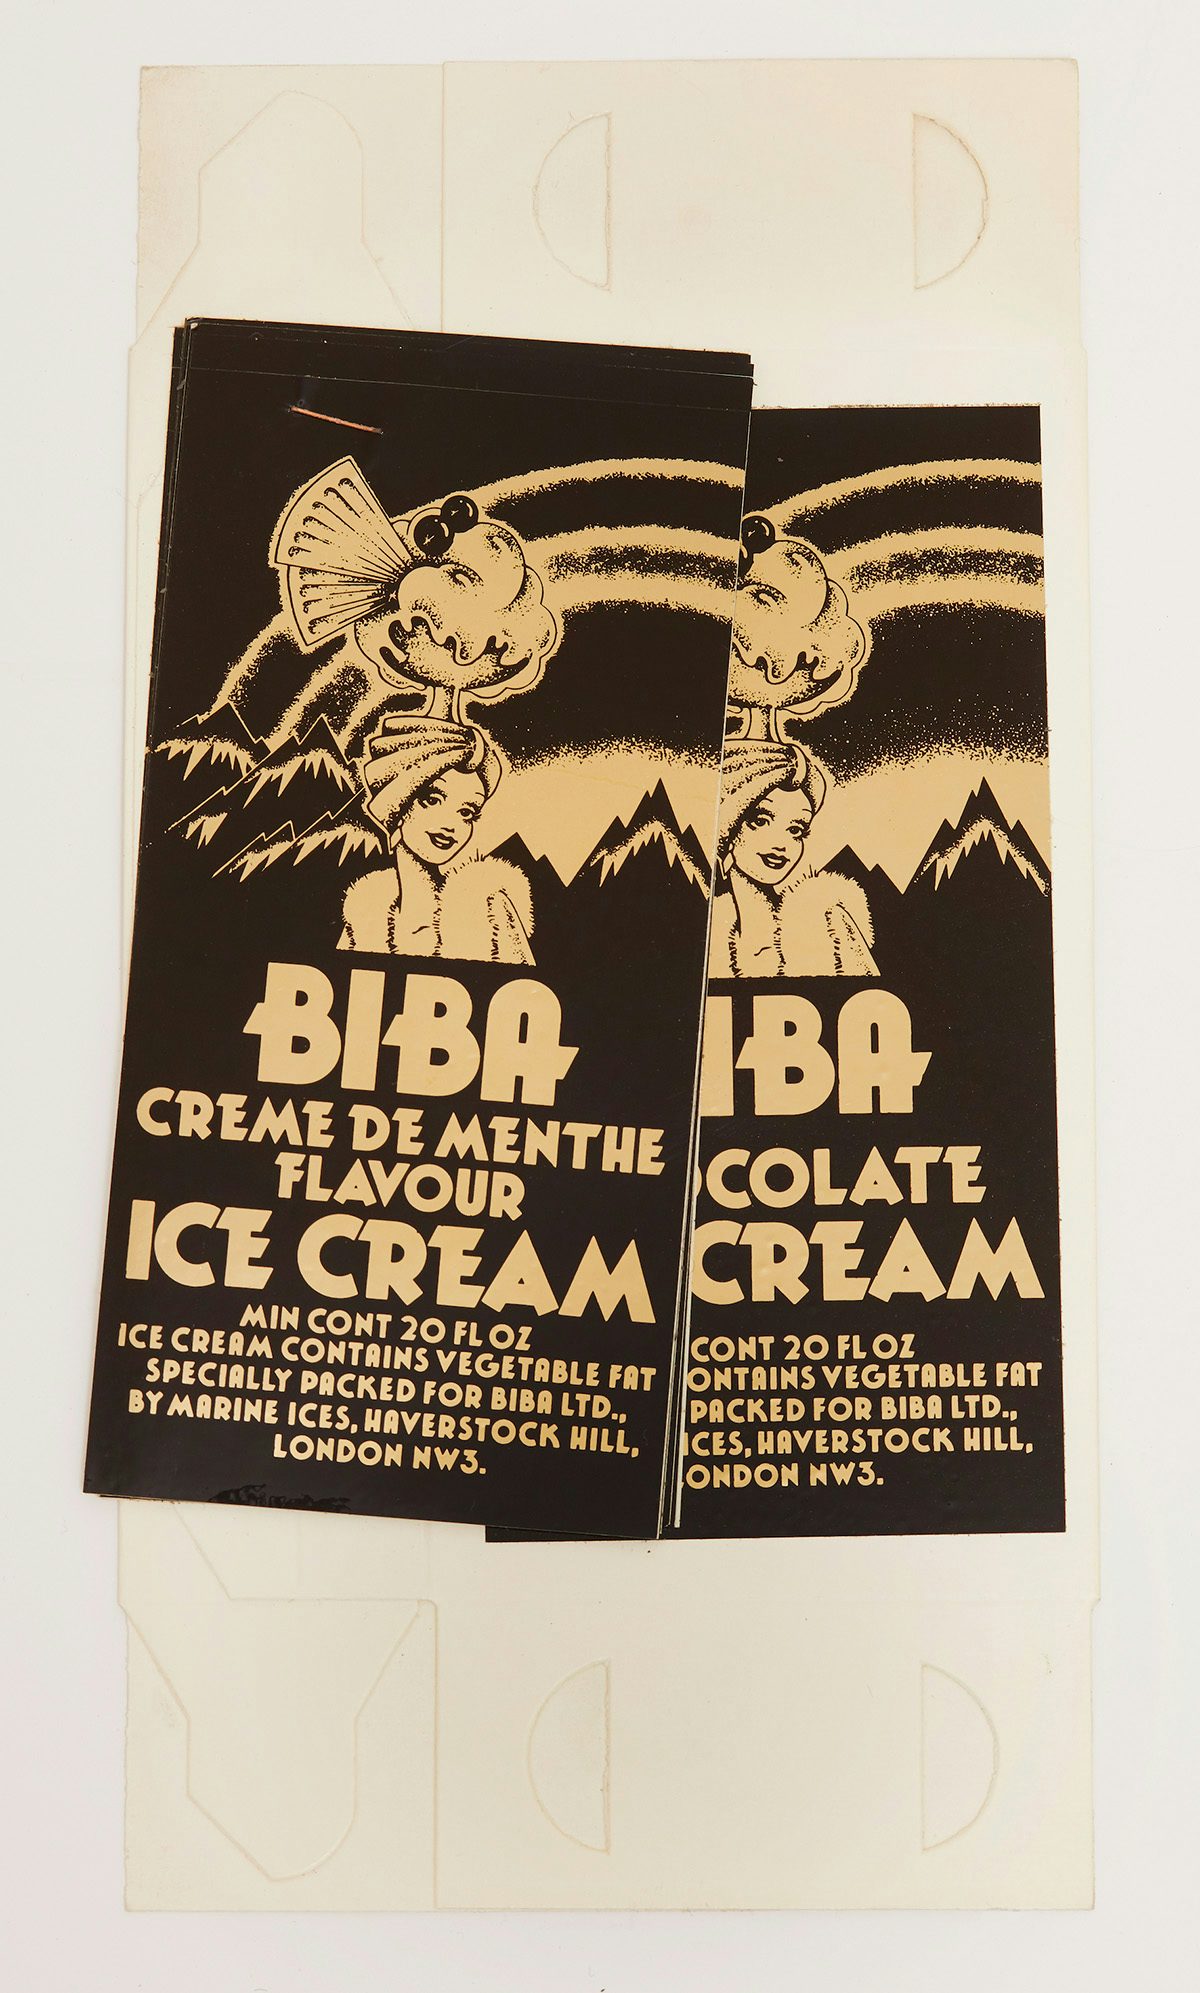 Photograph showing brown and yellow 70s style packaging for Biba ice cream